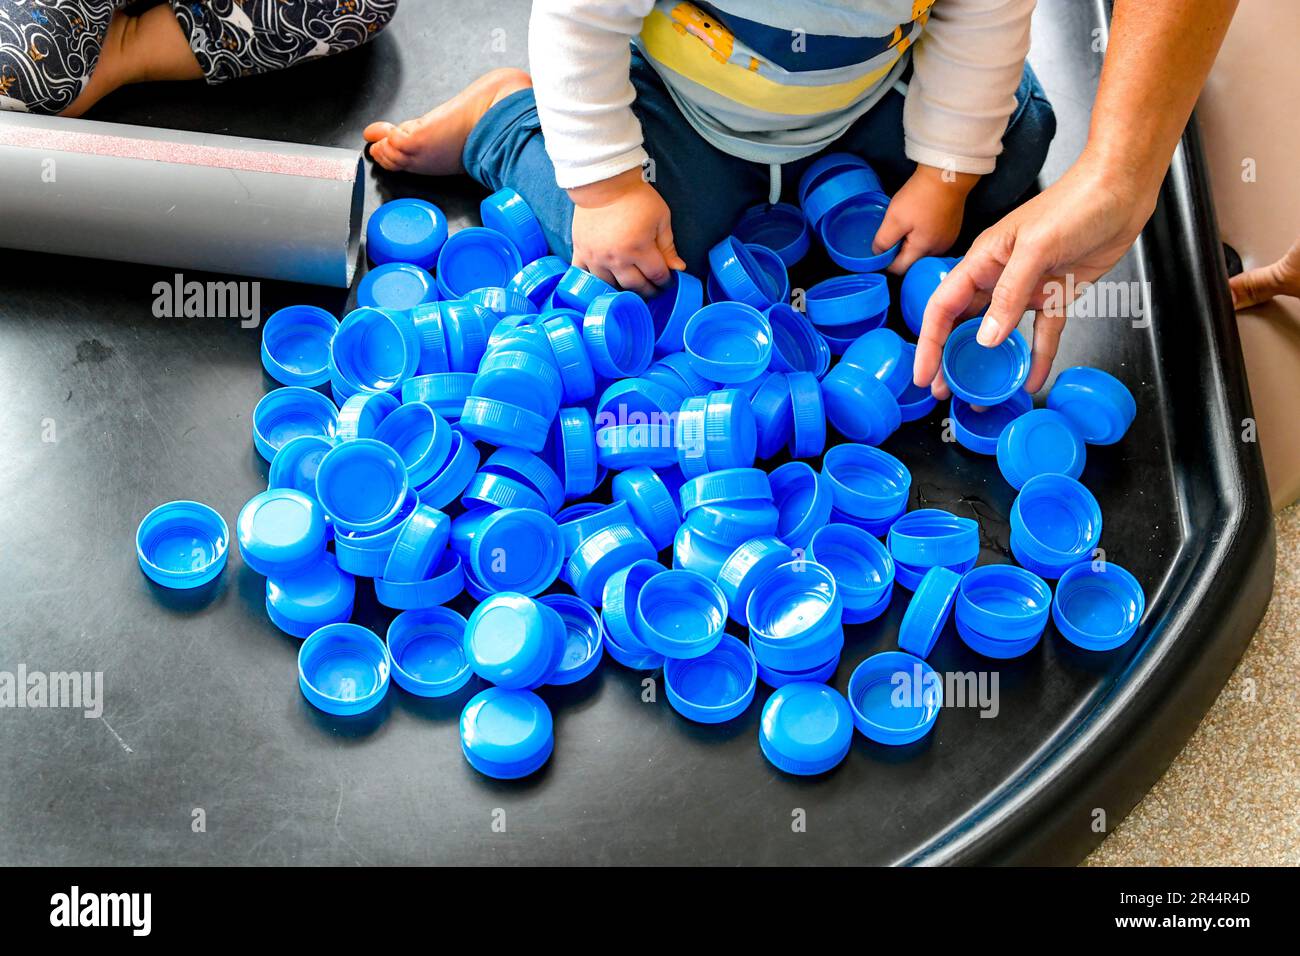 Child in a nursery playing with milk bottle tops Stock Photo